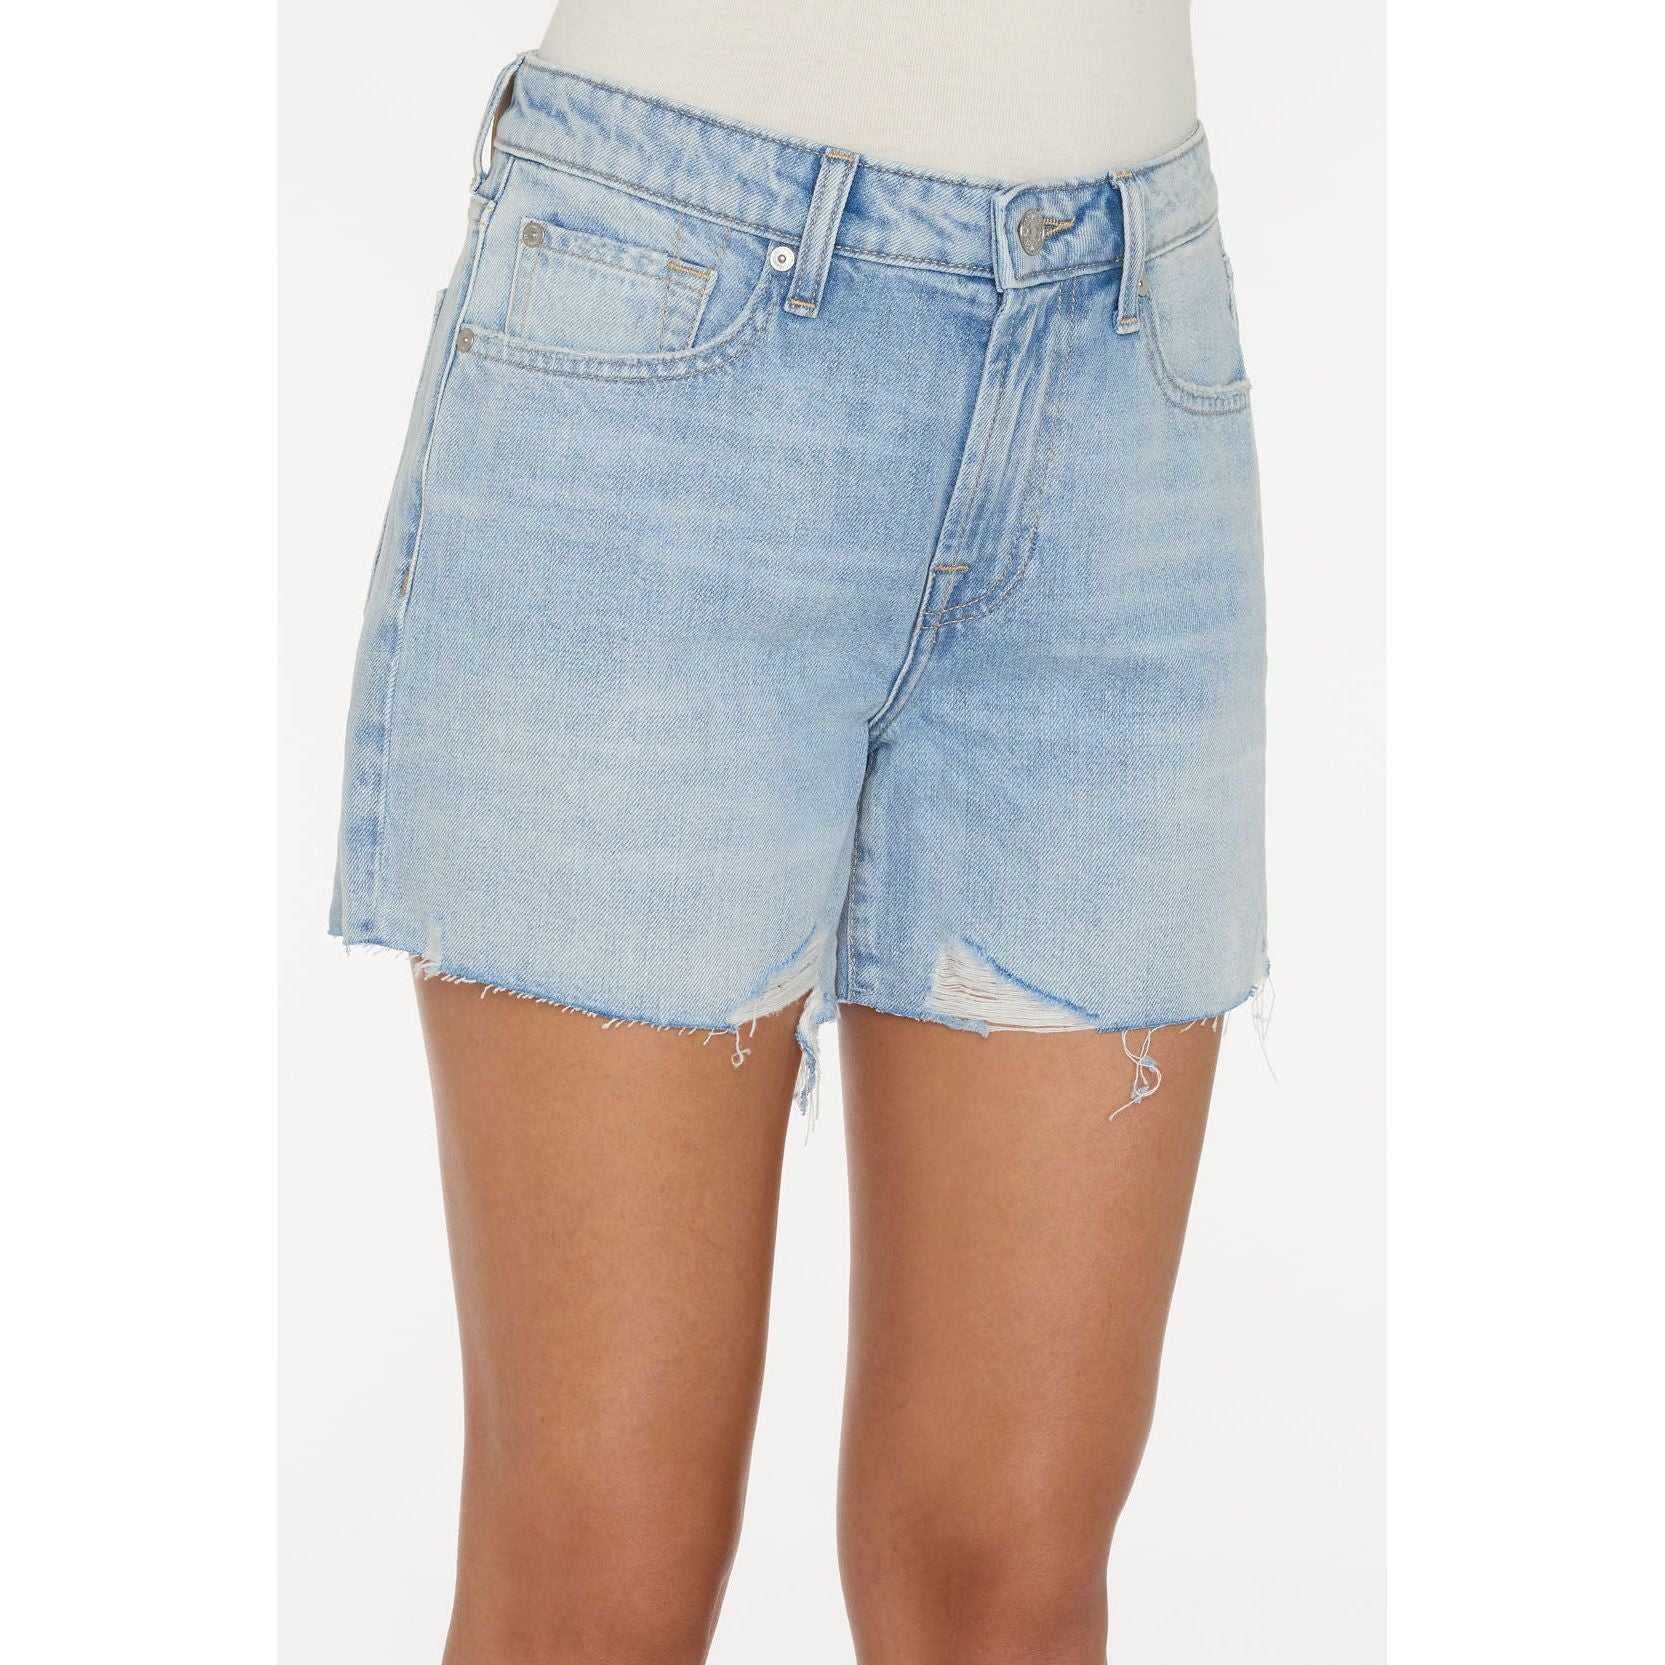 7 For All Mankind - Monroe Long Short in Time Off